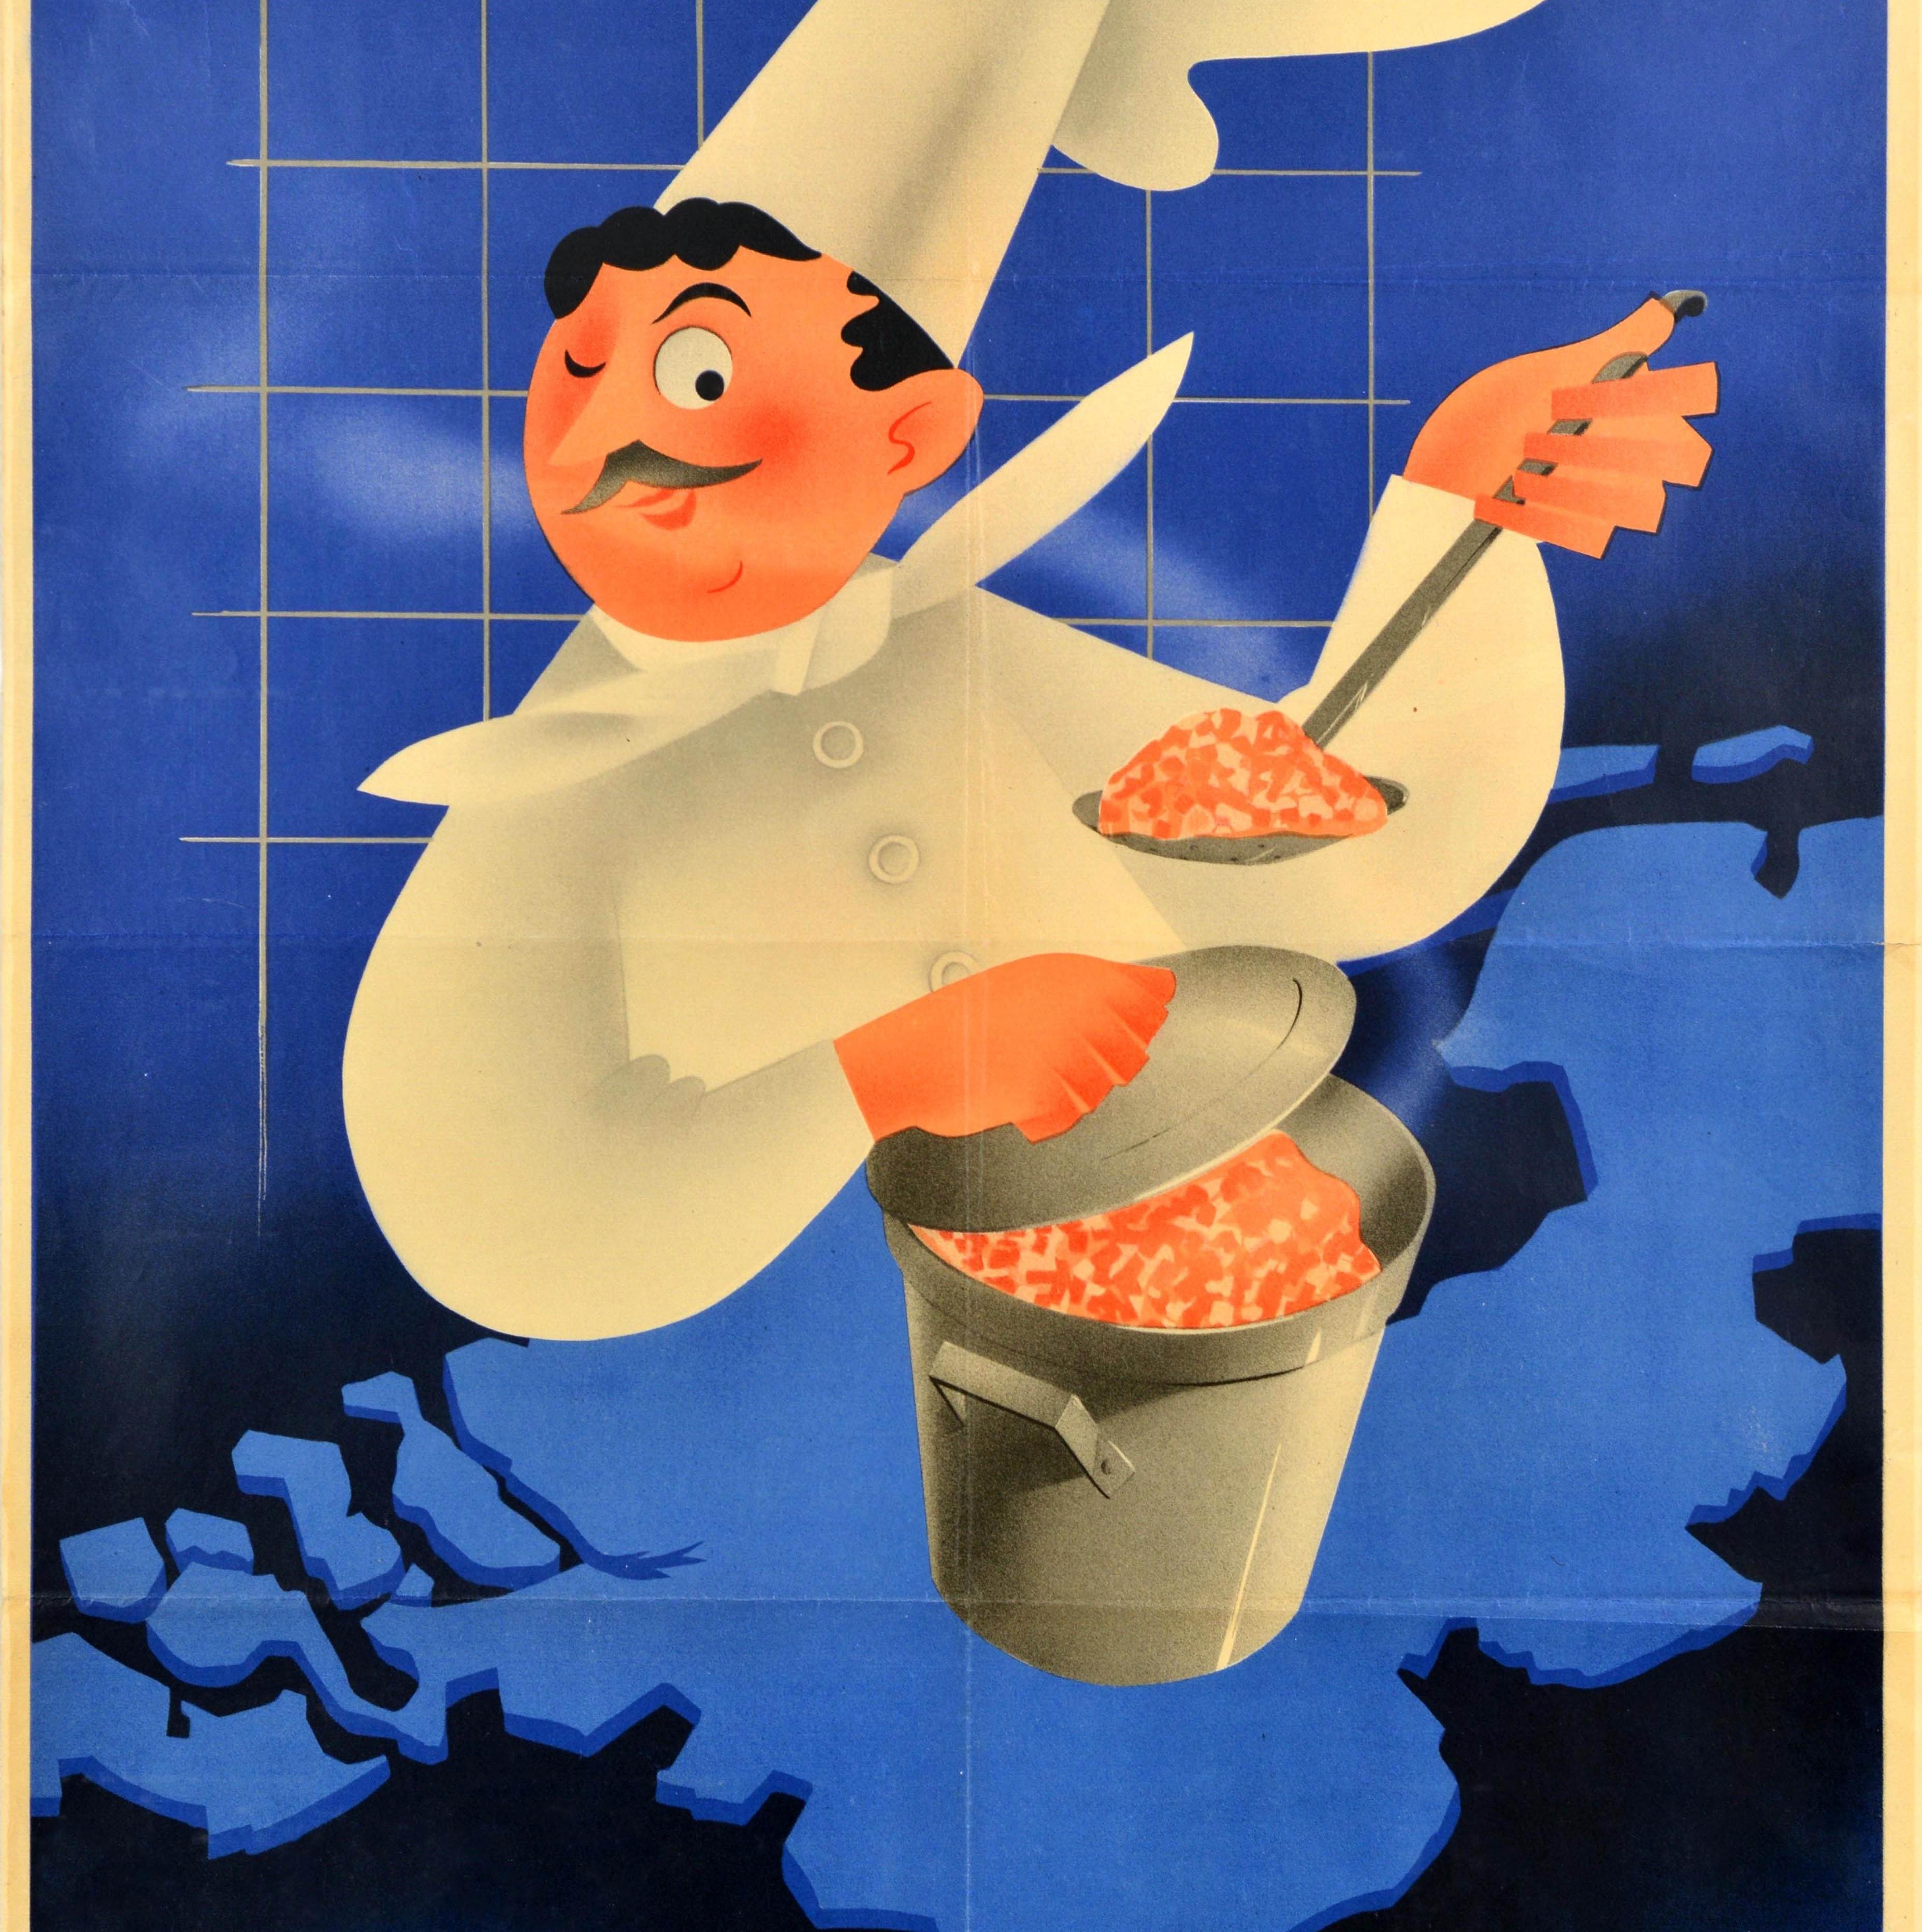 Original Vintage WWII Poster Central Kitchens War Food Centrale Keukens Map Chef - Blue Print by Joop Geesink